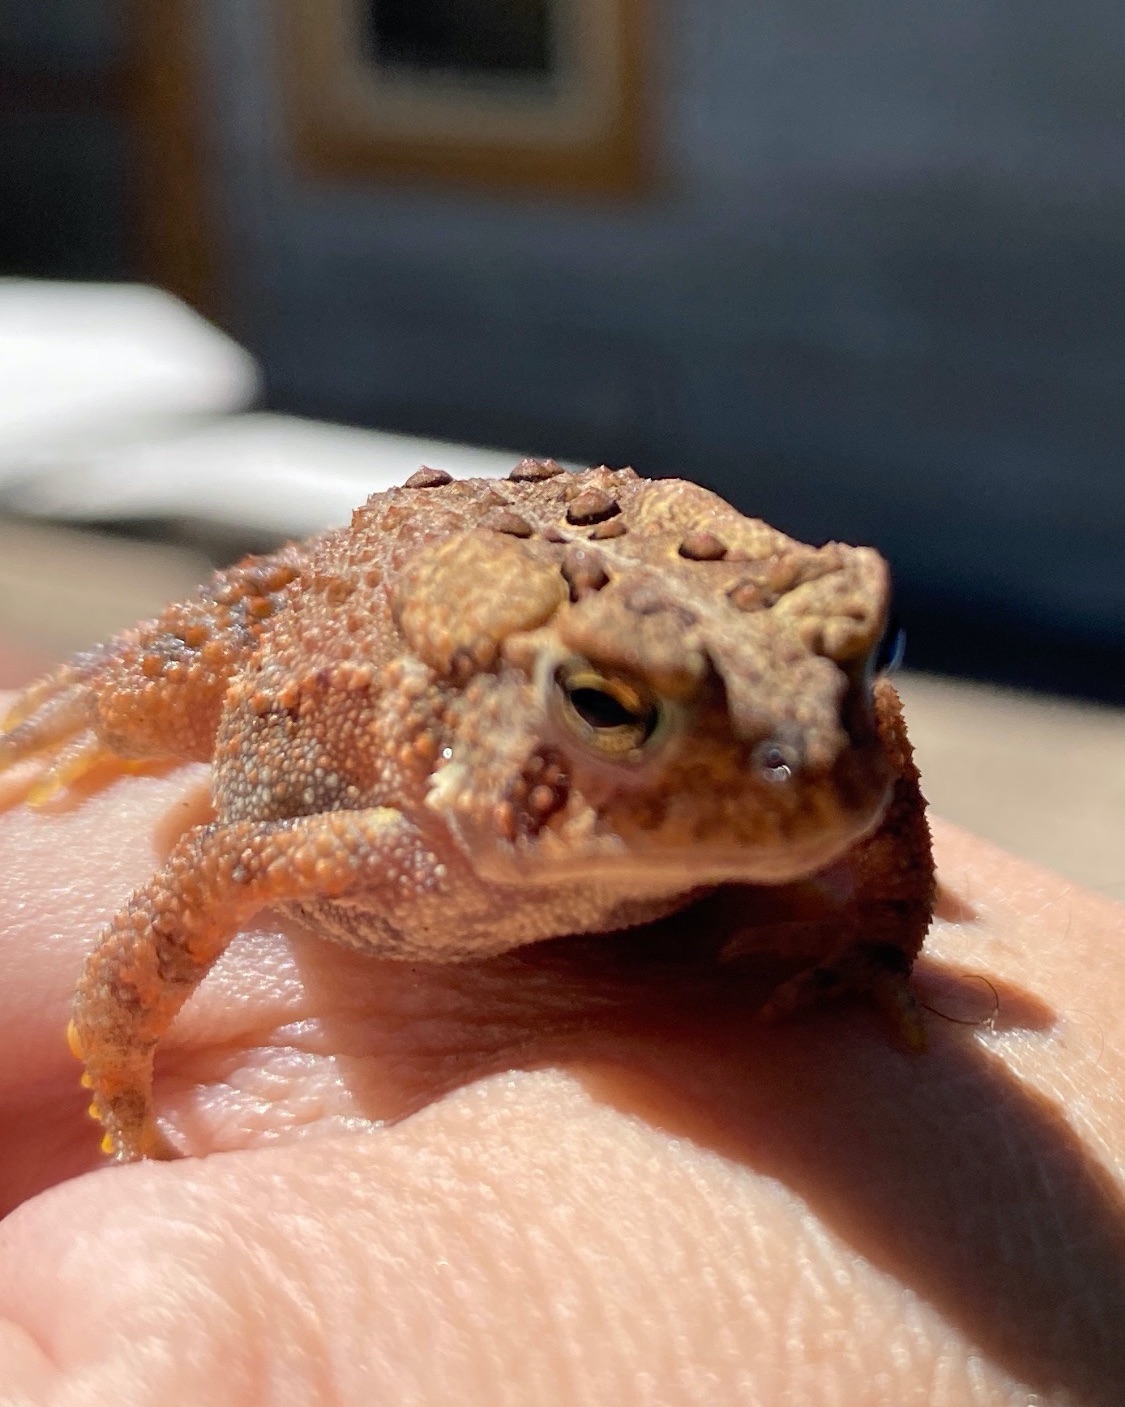 Cecil, the frog my dad found.